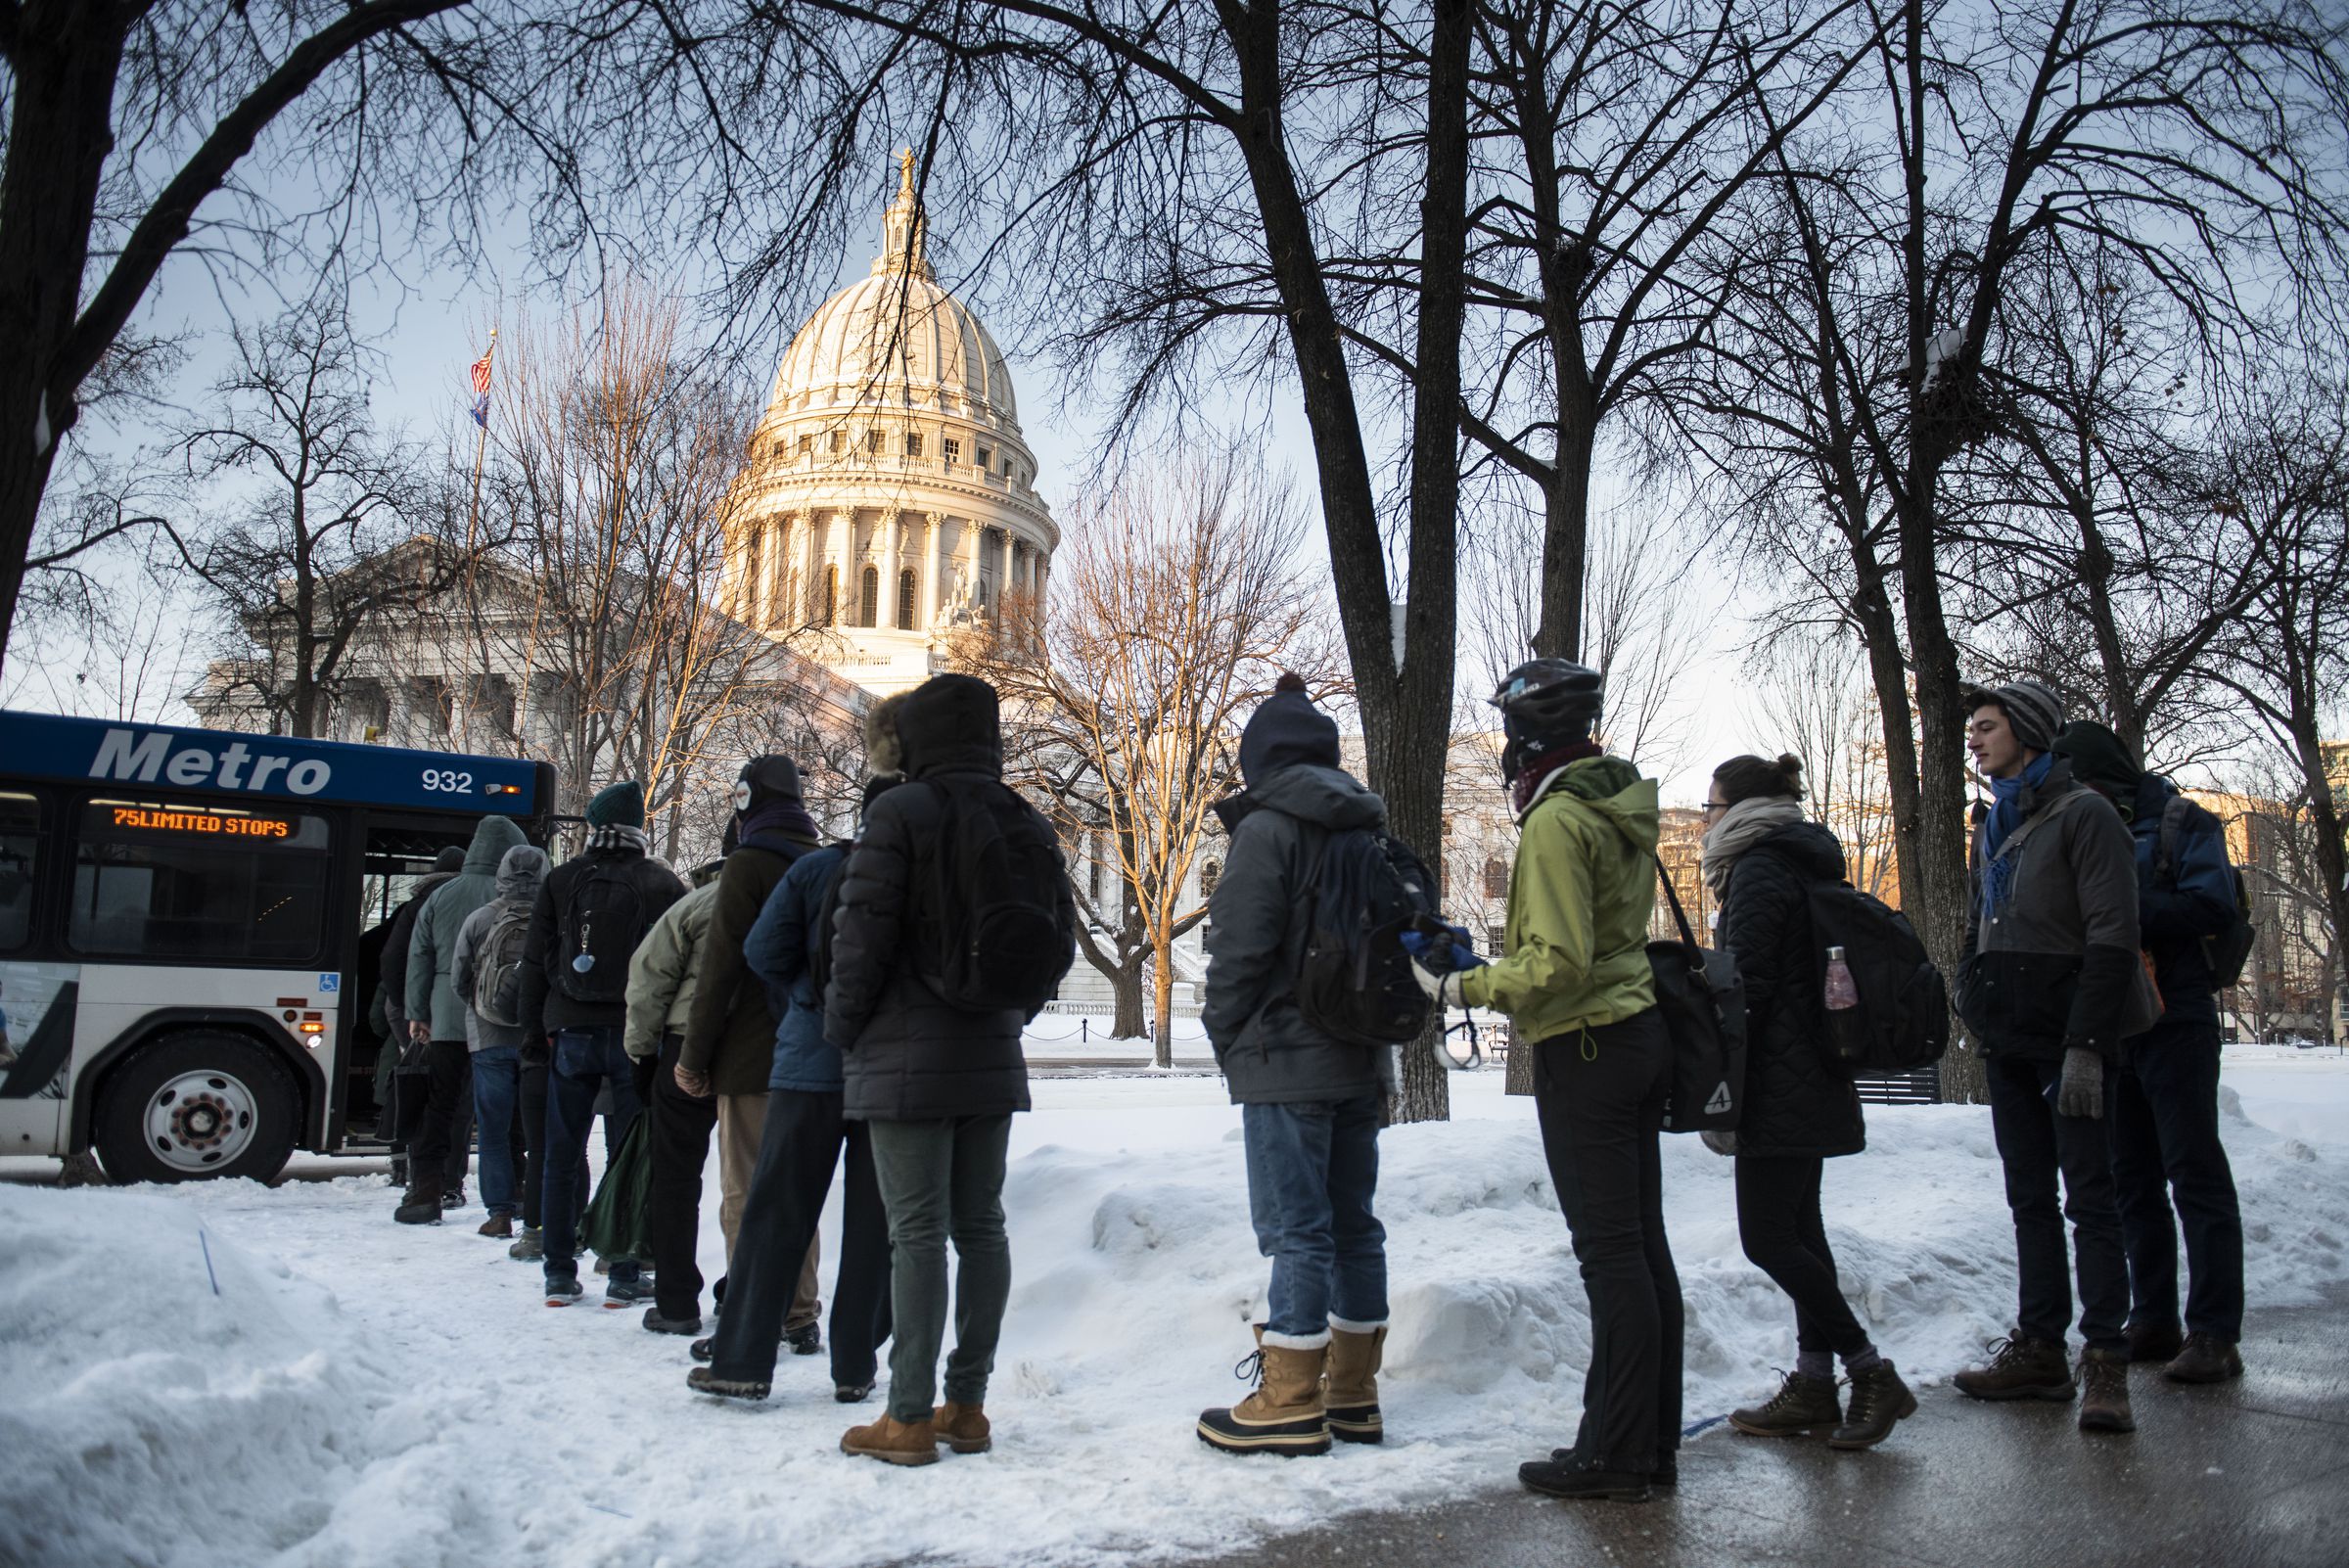 Commuters wait for the bus on South Pinckney Street in downtown Madison, Wisconsin, as extreme temperatures hit the region.